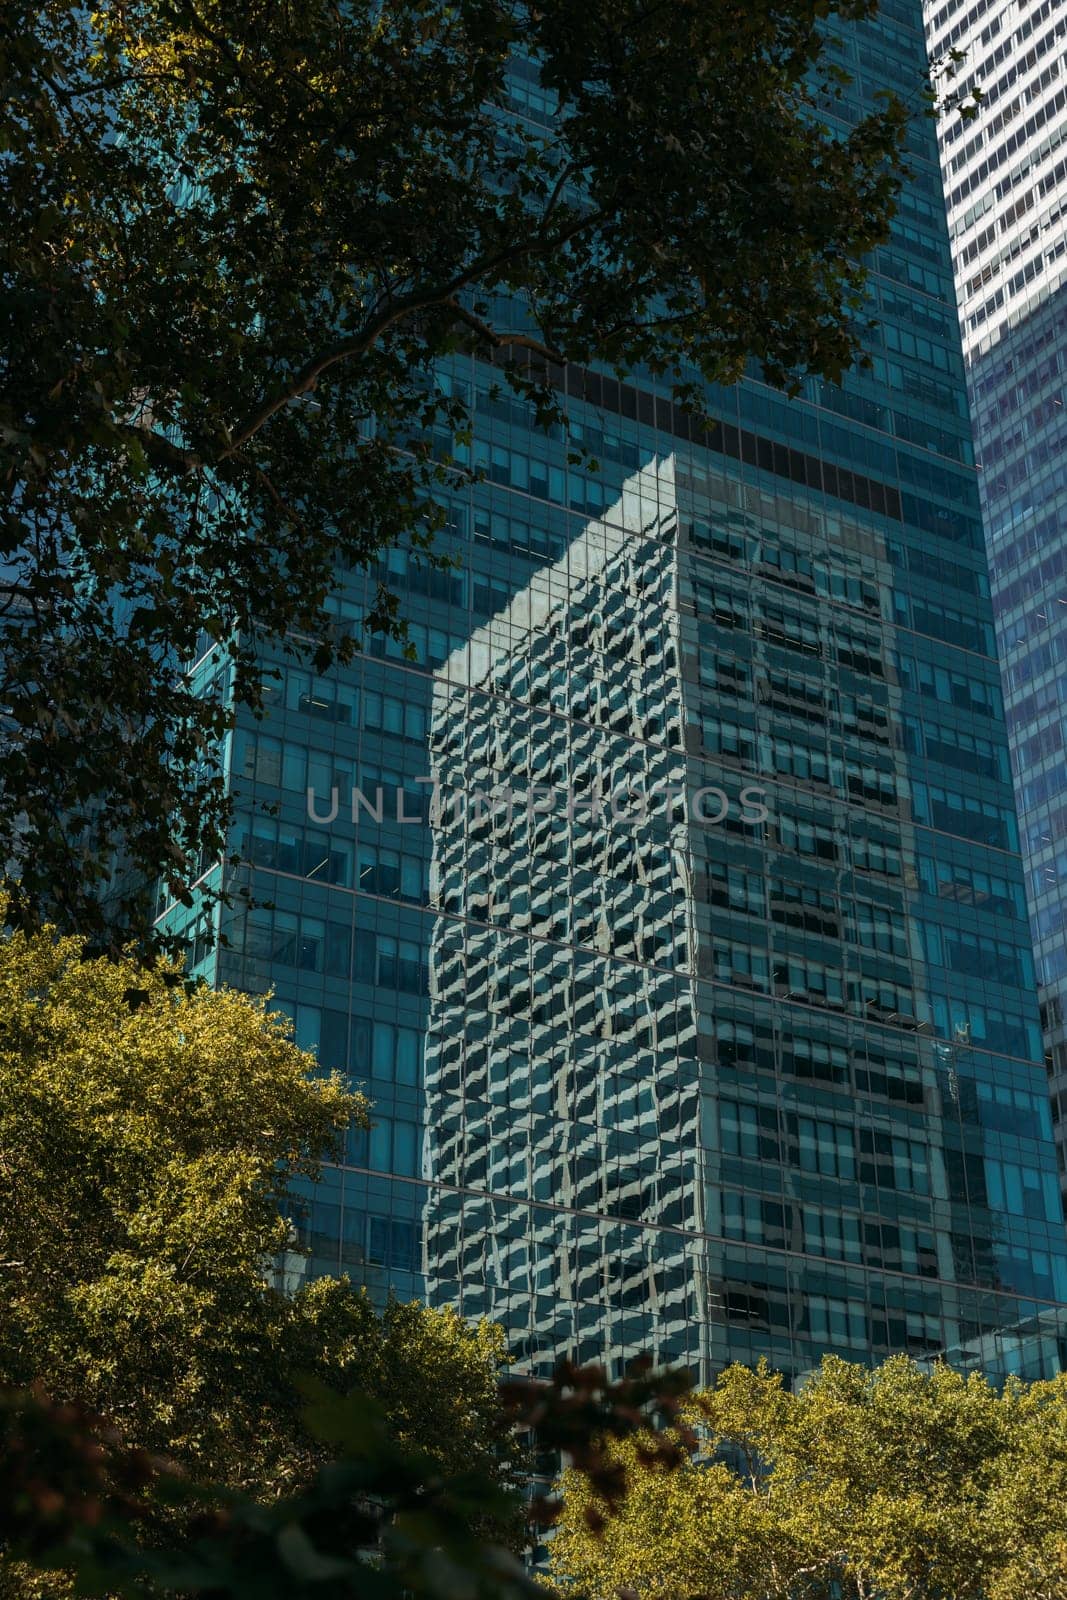 Modern glass skyscrapers with reflections of trees and buildings in New York City during the day.